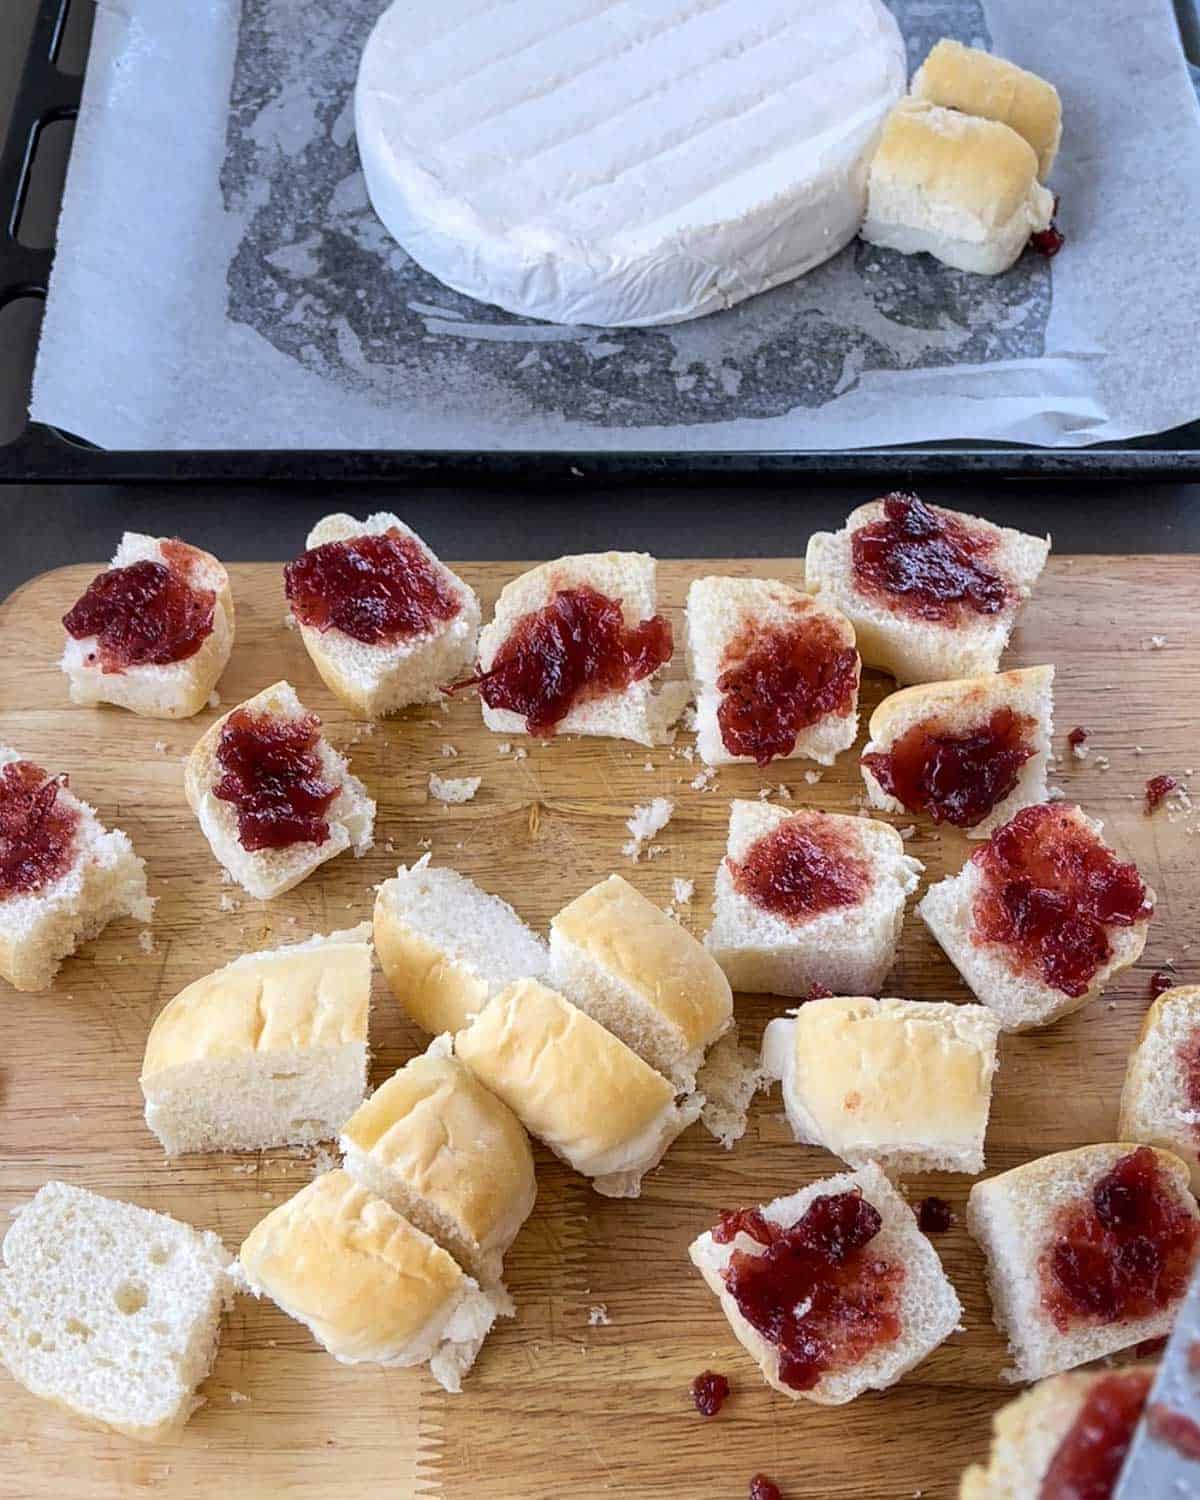 A large cog of brie on a lined baking tray next to bread rolls spread with cranberry sauce on a wooden chopping board.